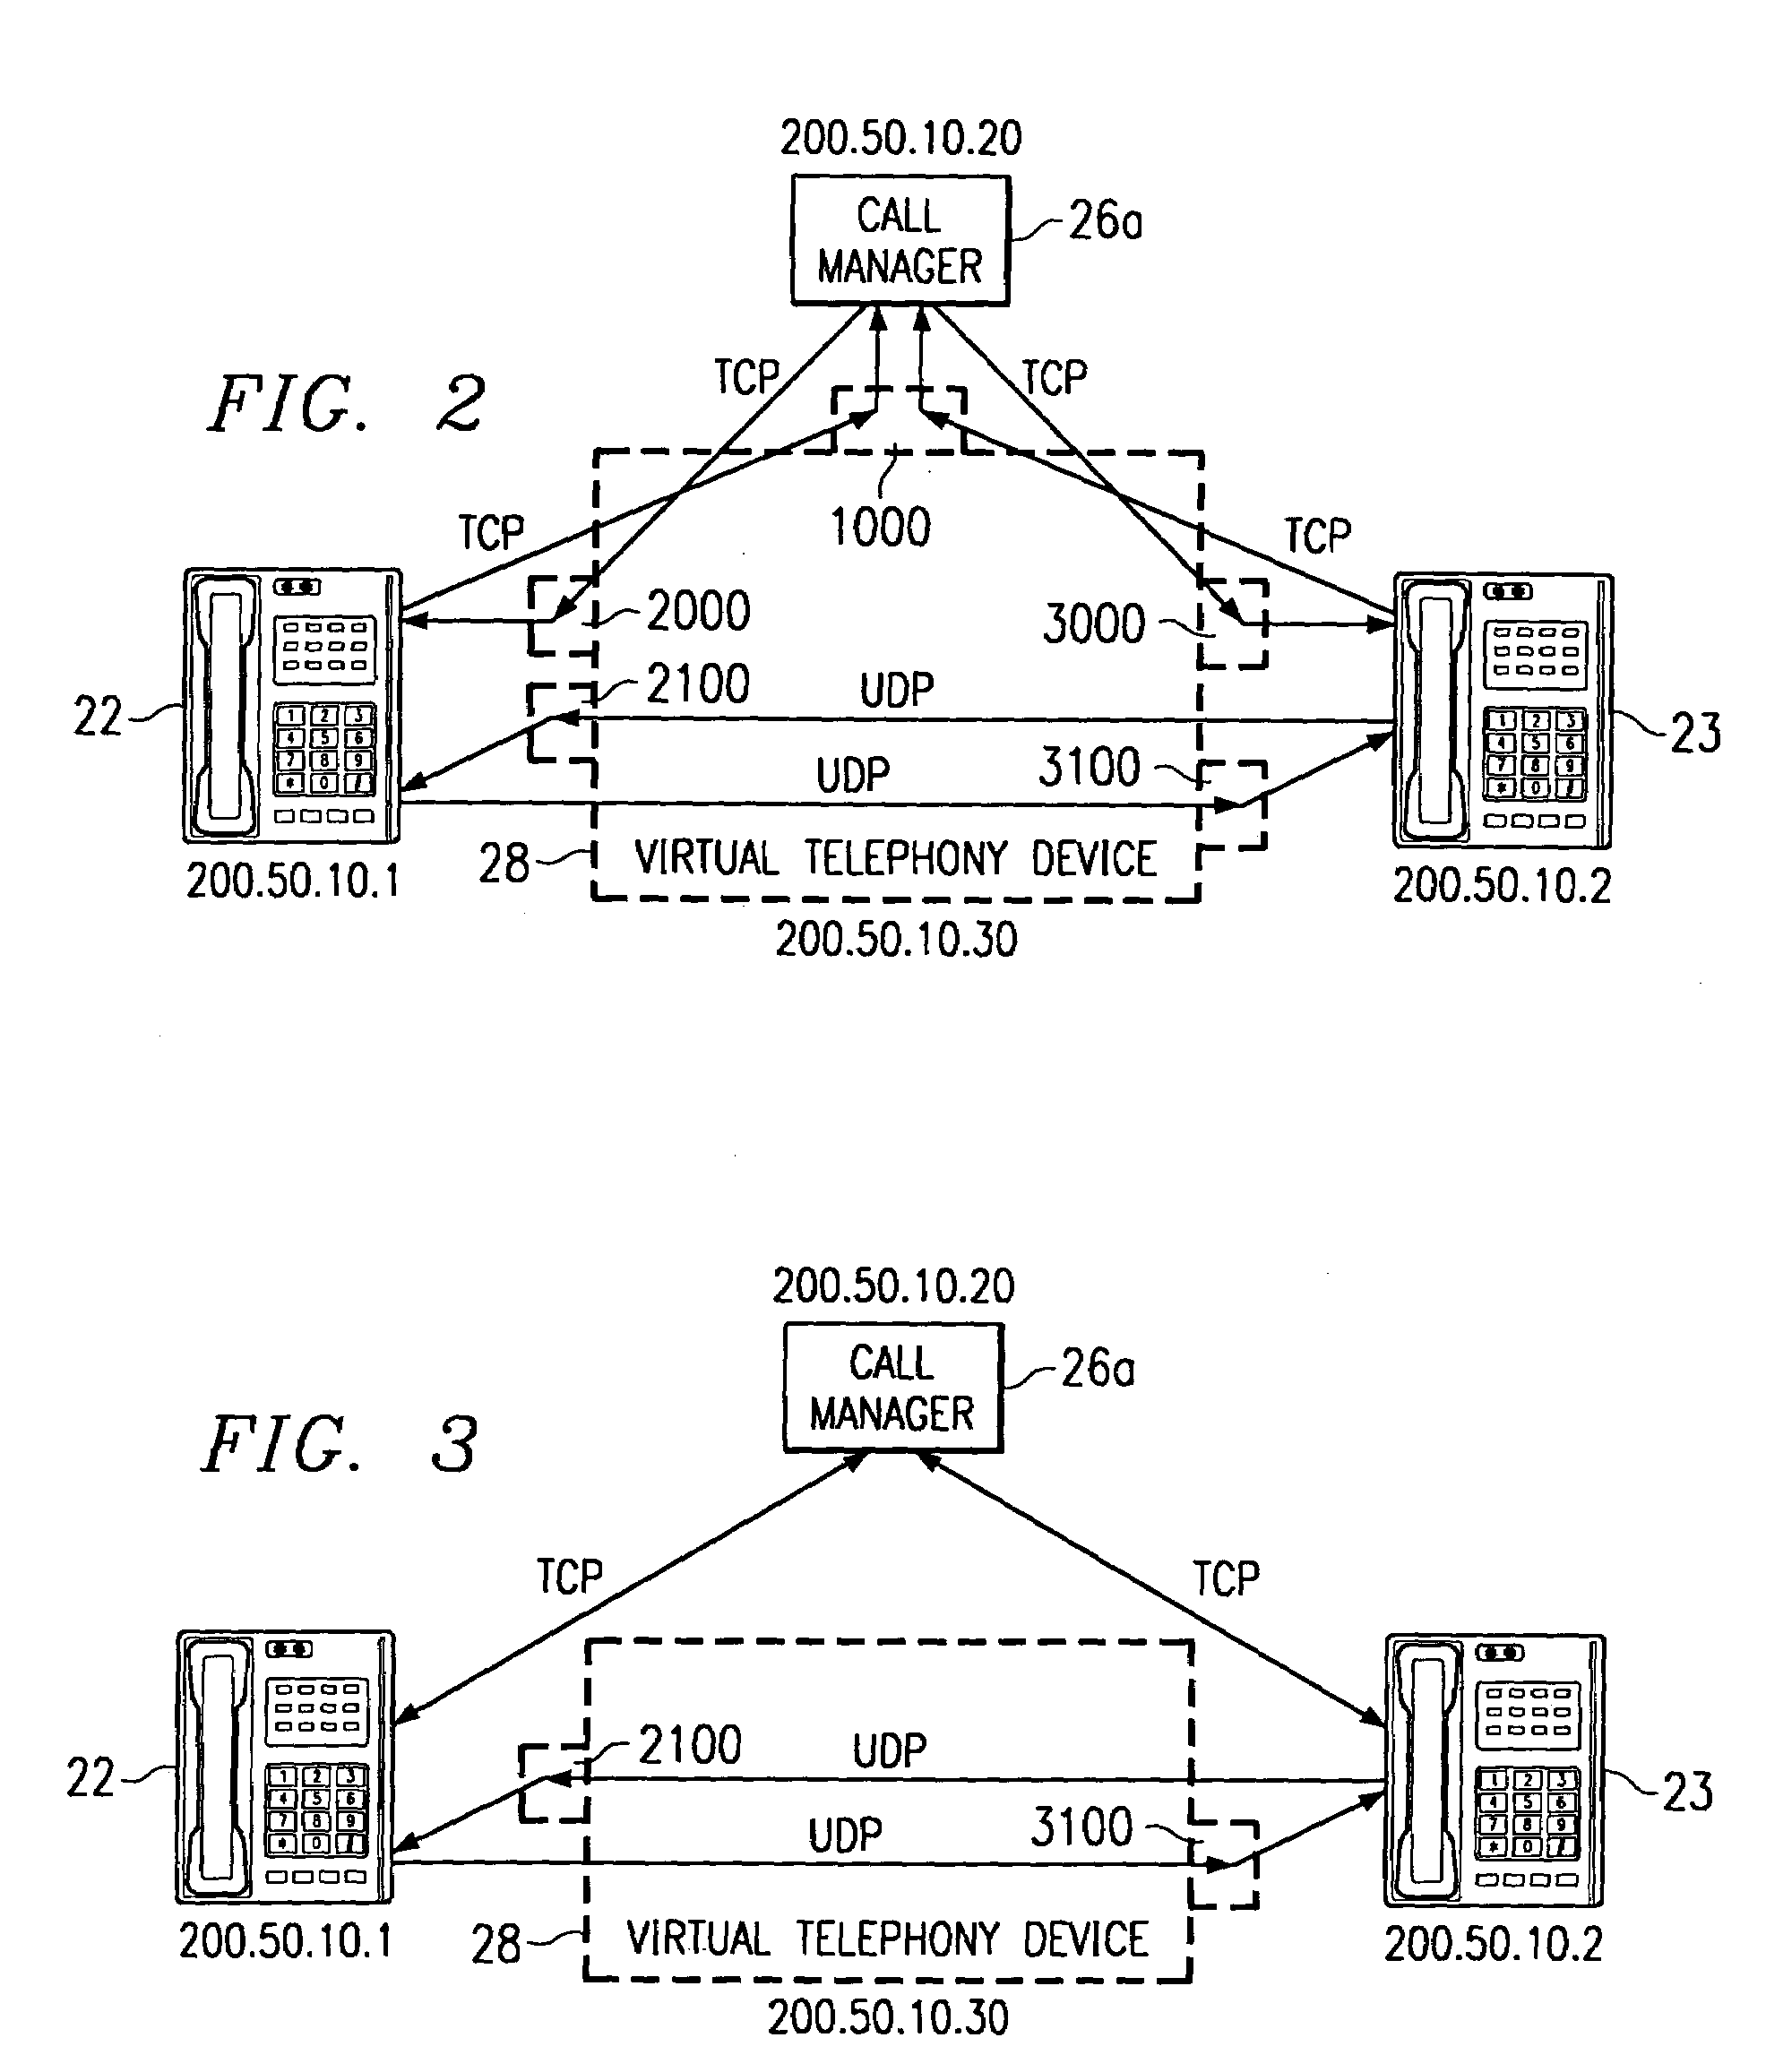 System and method for enabling multicast telecommunications